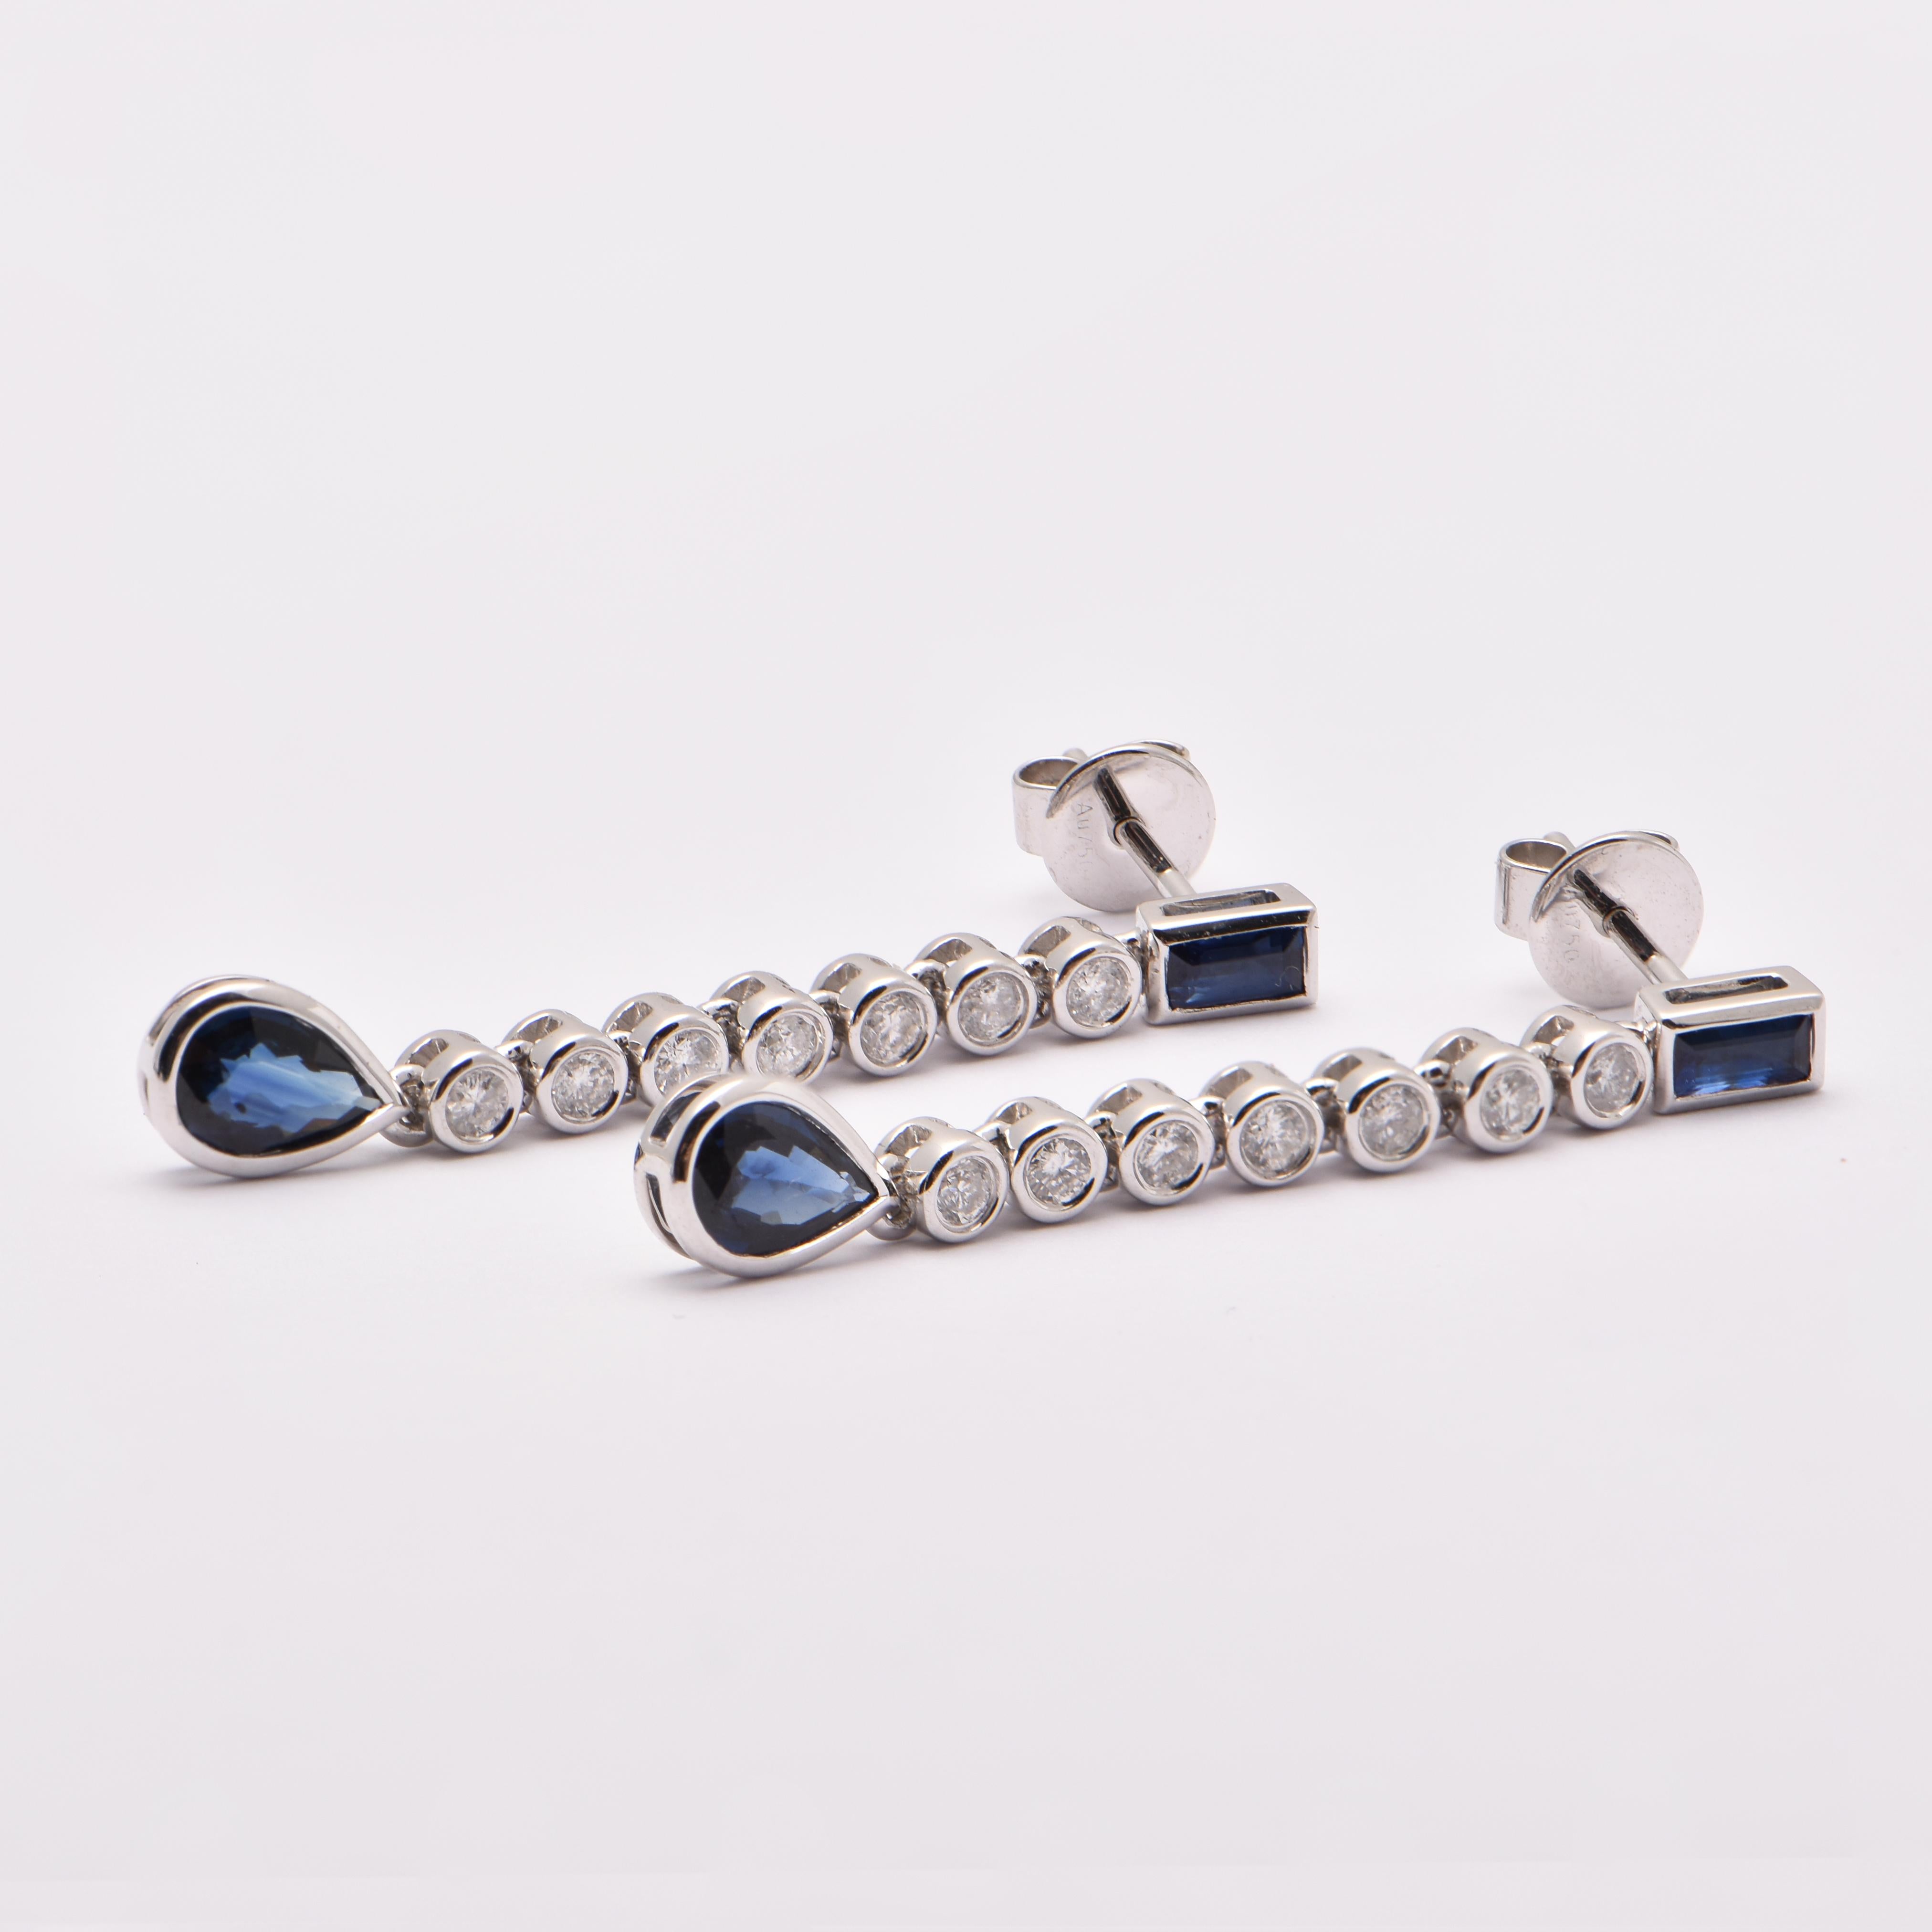 Sapphire and Diamond Bezel Set Drop Earrings in 18 Carat White Gold by Cartmer Jewellery

4 Sapphires totalling 1.15cts
14 Diamonds totalling 0.35cts
18ct White Gold Earrings

FREE express postage usually 3-4 days Sydney to New York  
FREE